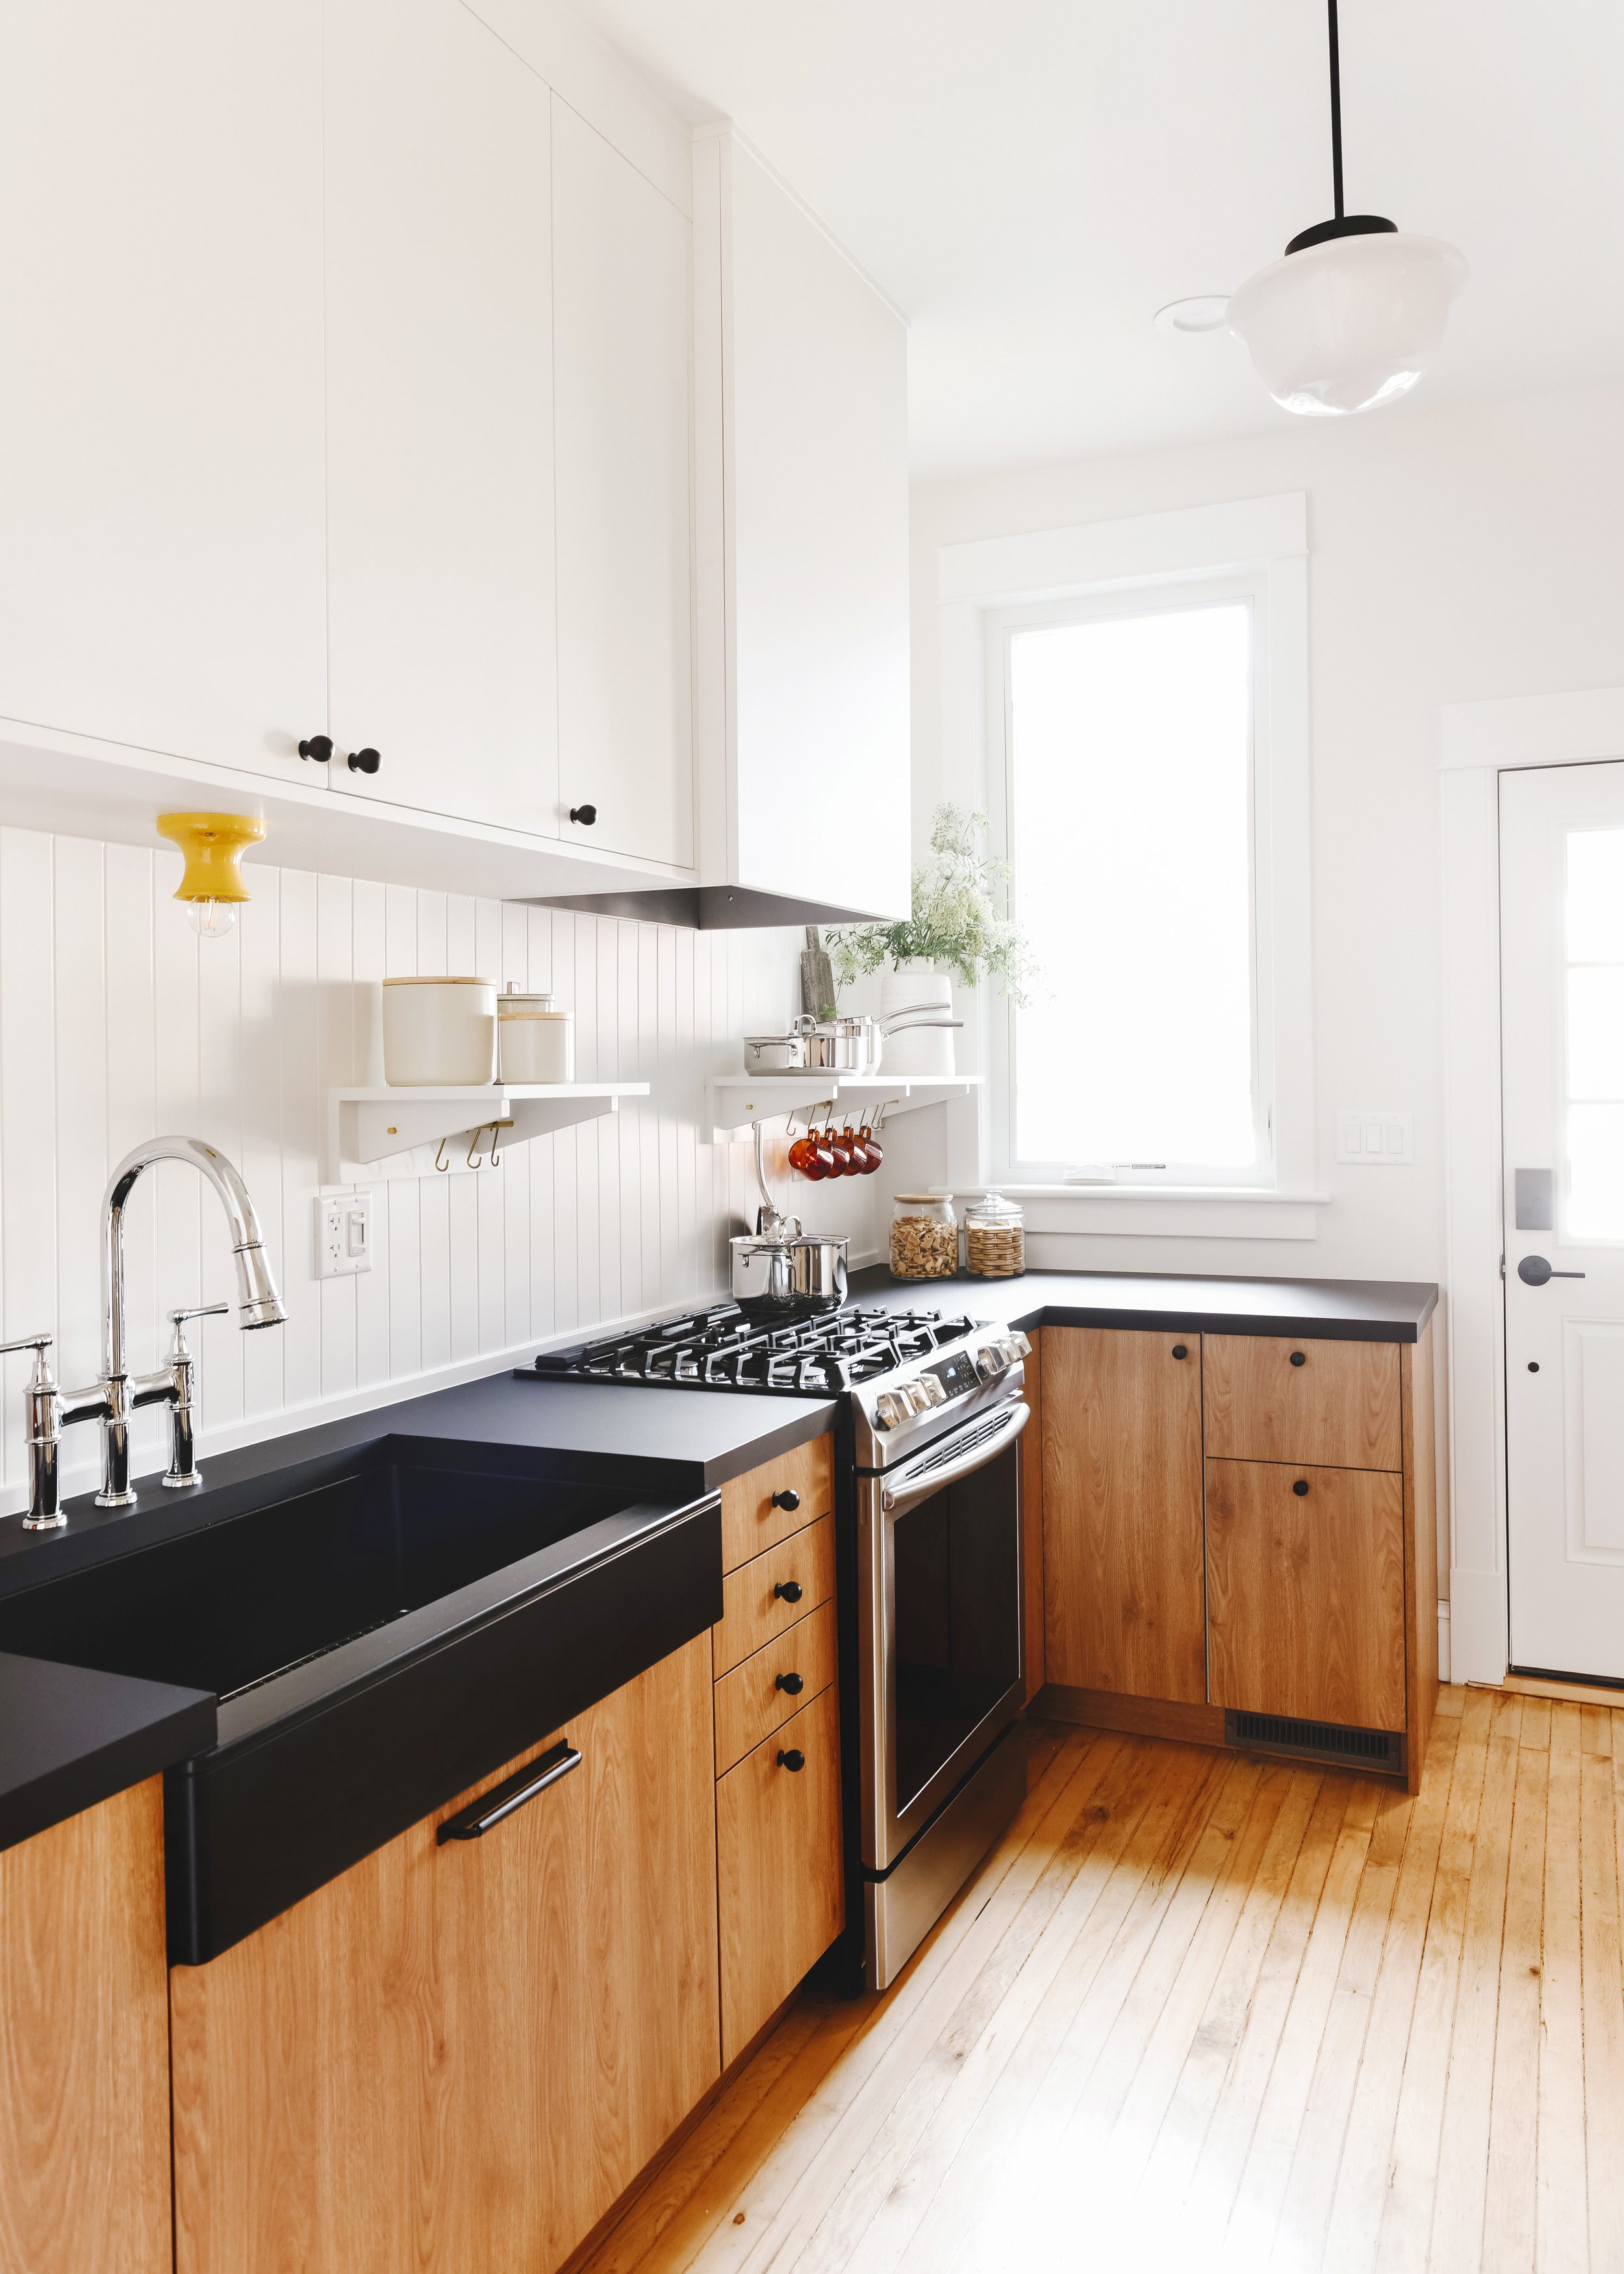 A compact but mighty wood + white kitchen | via Yellow Brick Home